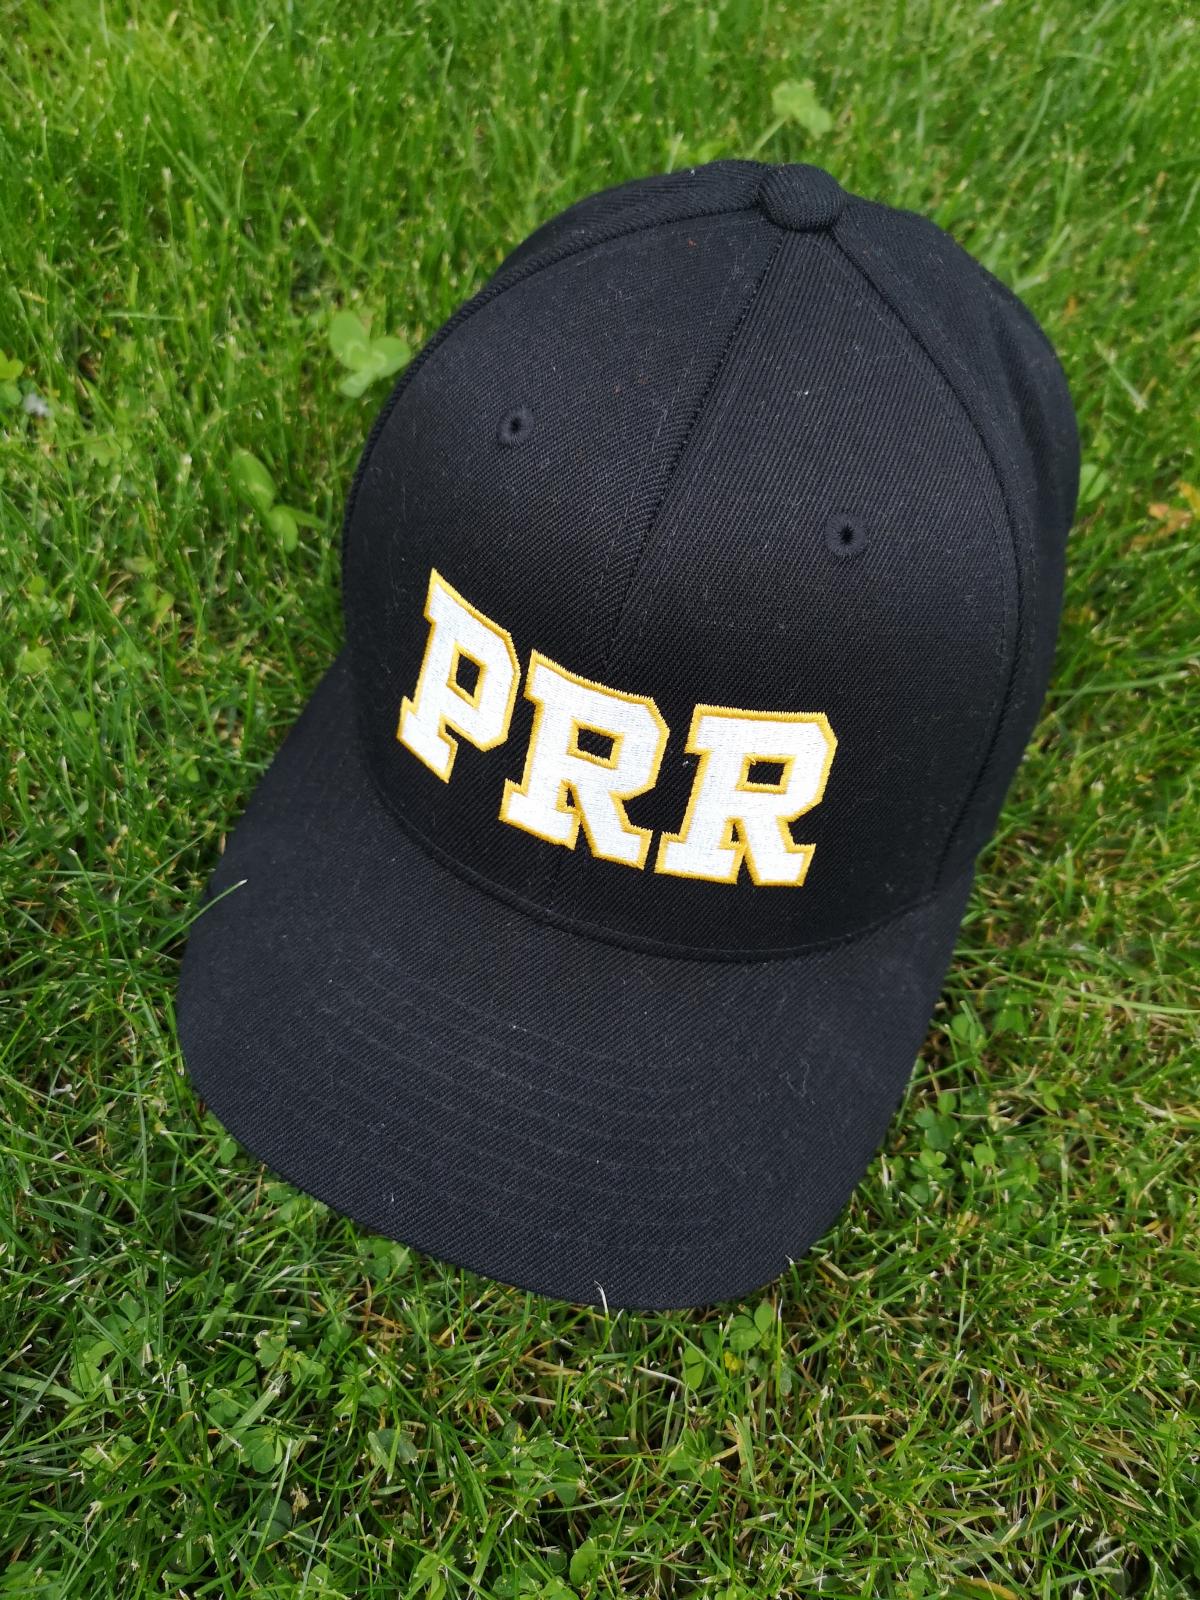 Pitt River Rats Take away some valuable lessons from 2019 LBI